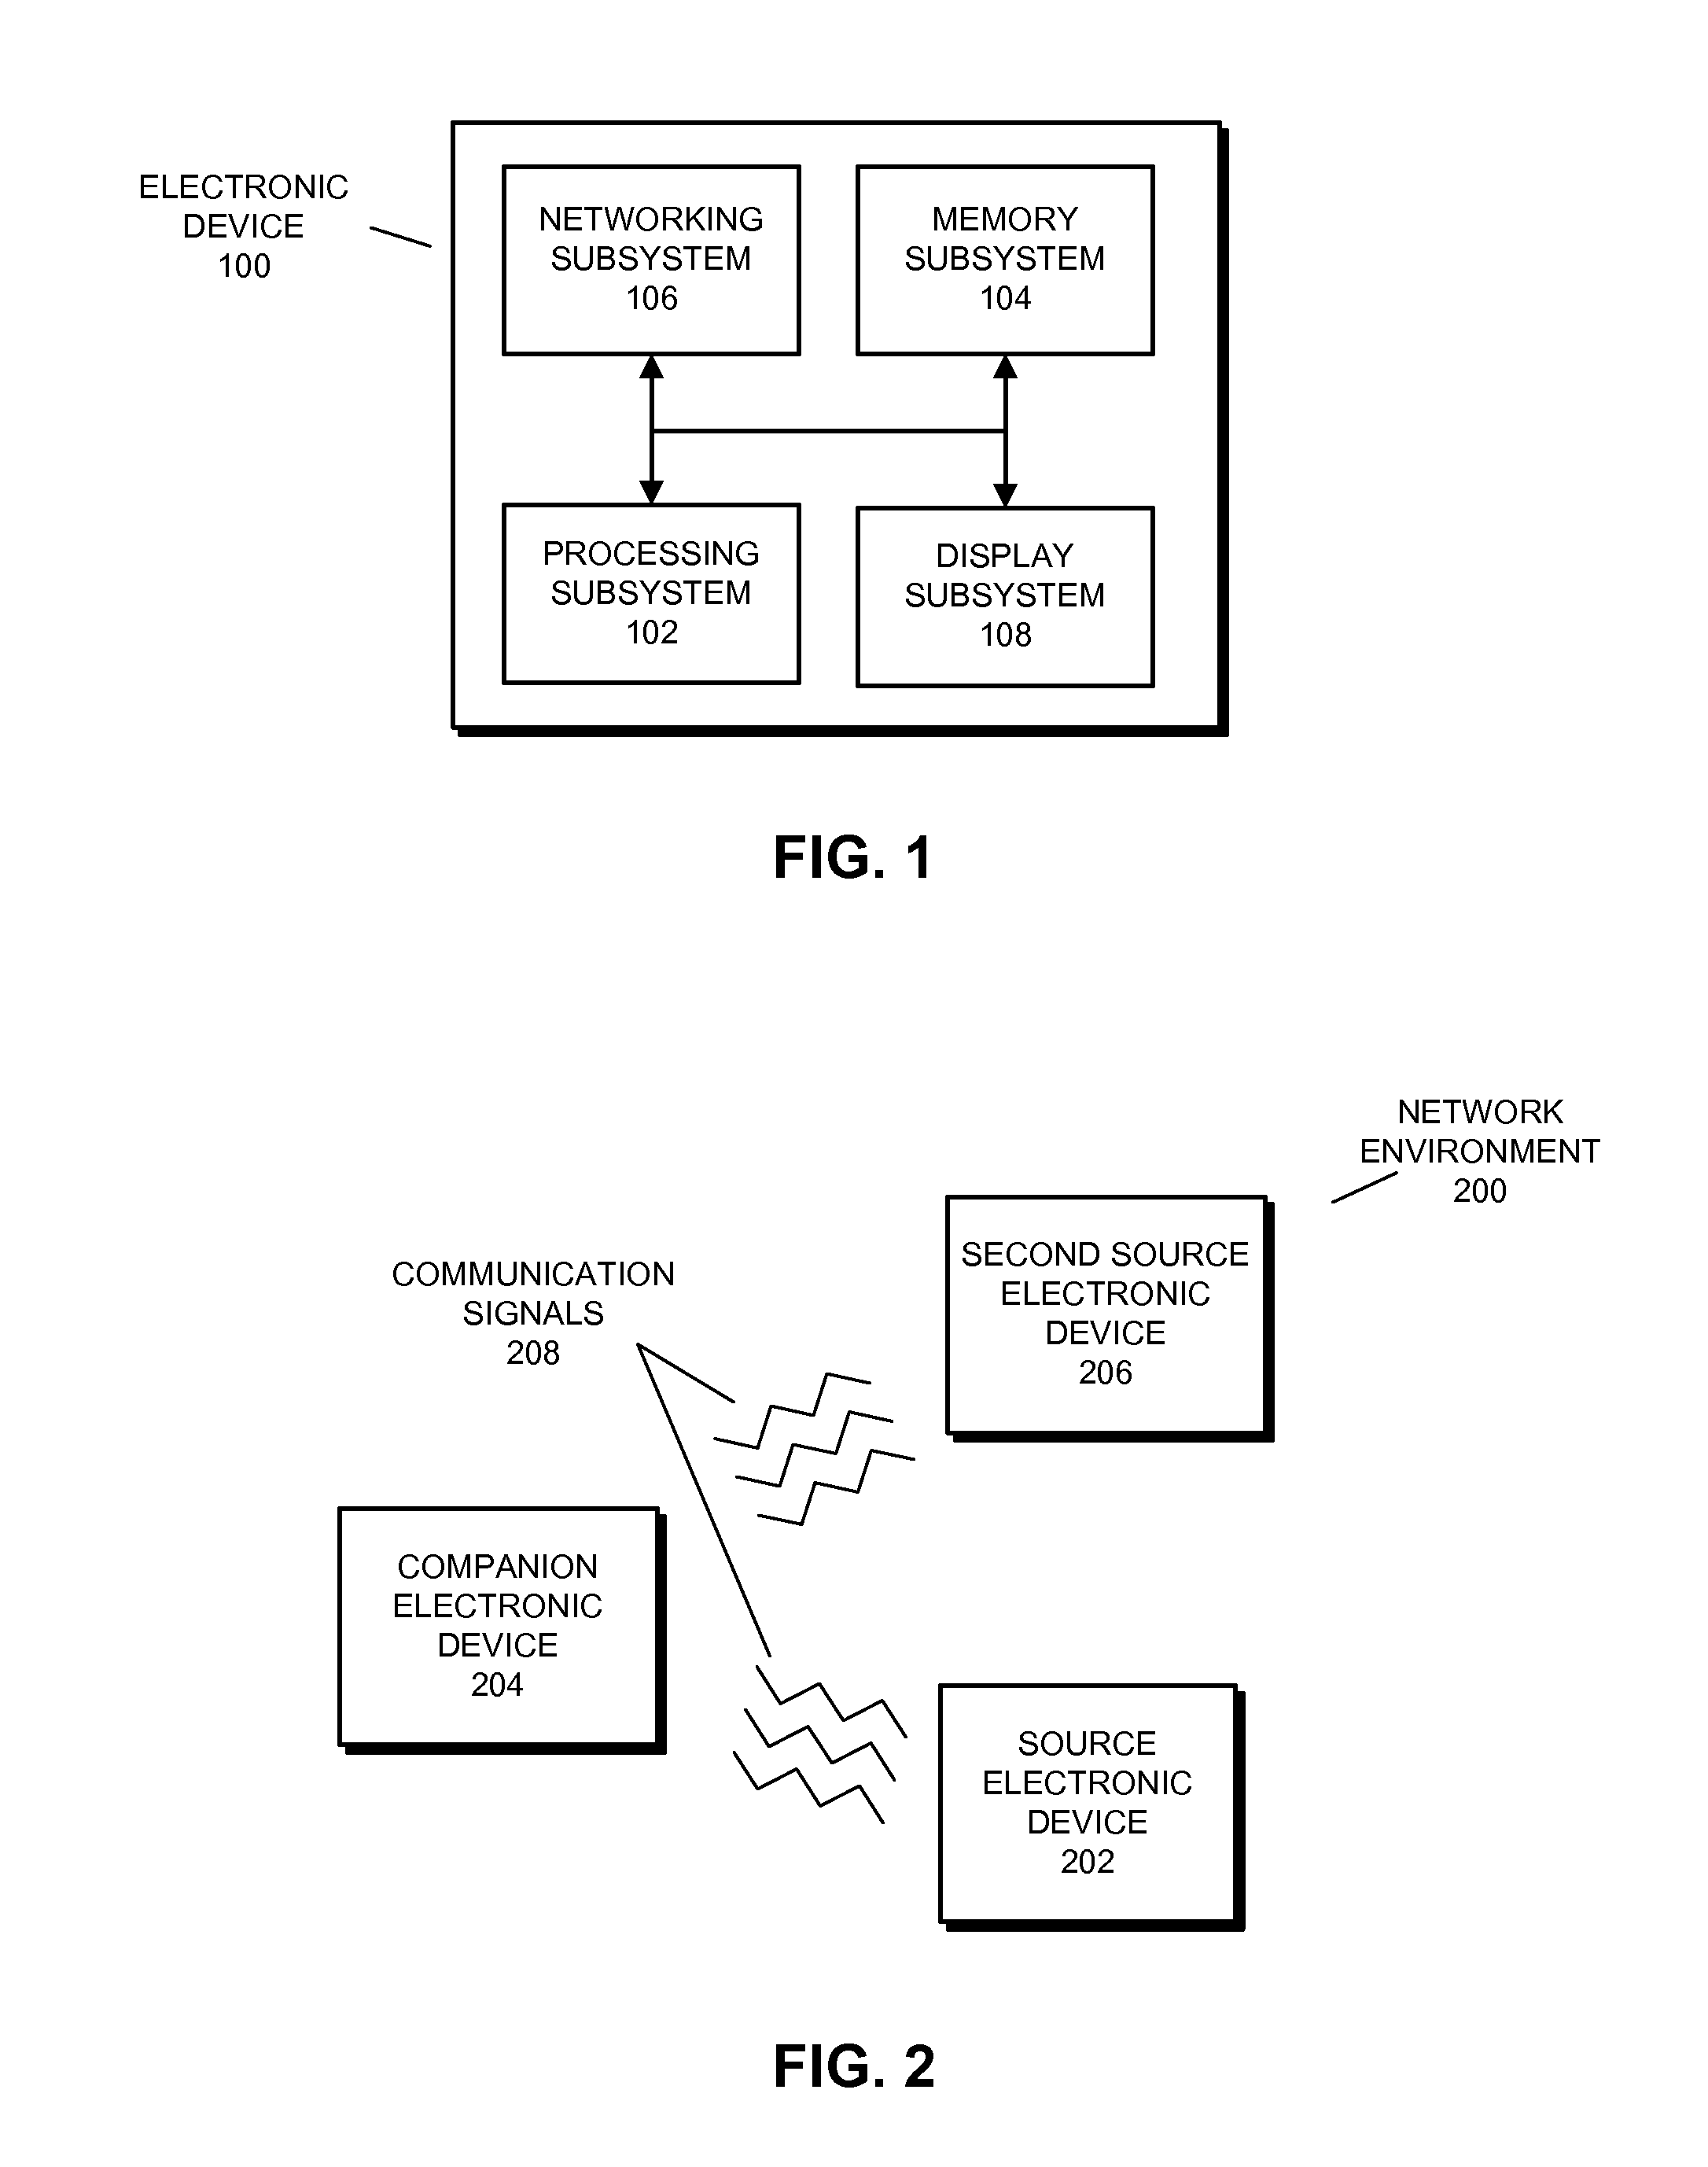 Forwarding activity-related information from source electronic devices to companion electronic devices